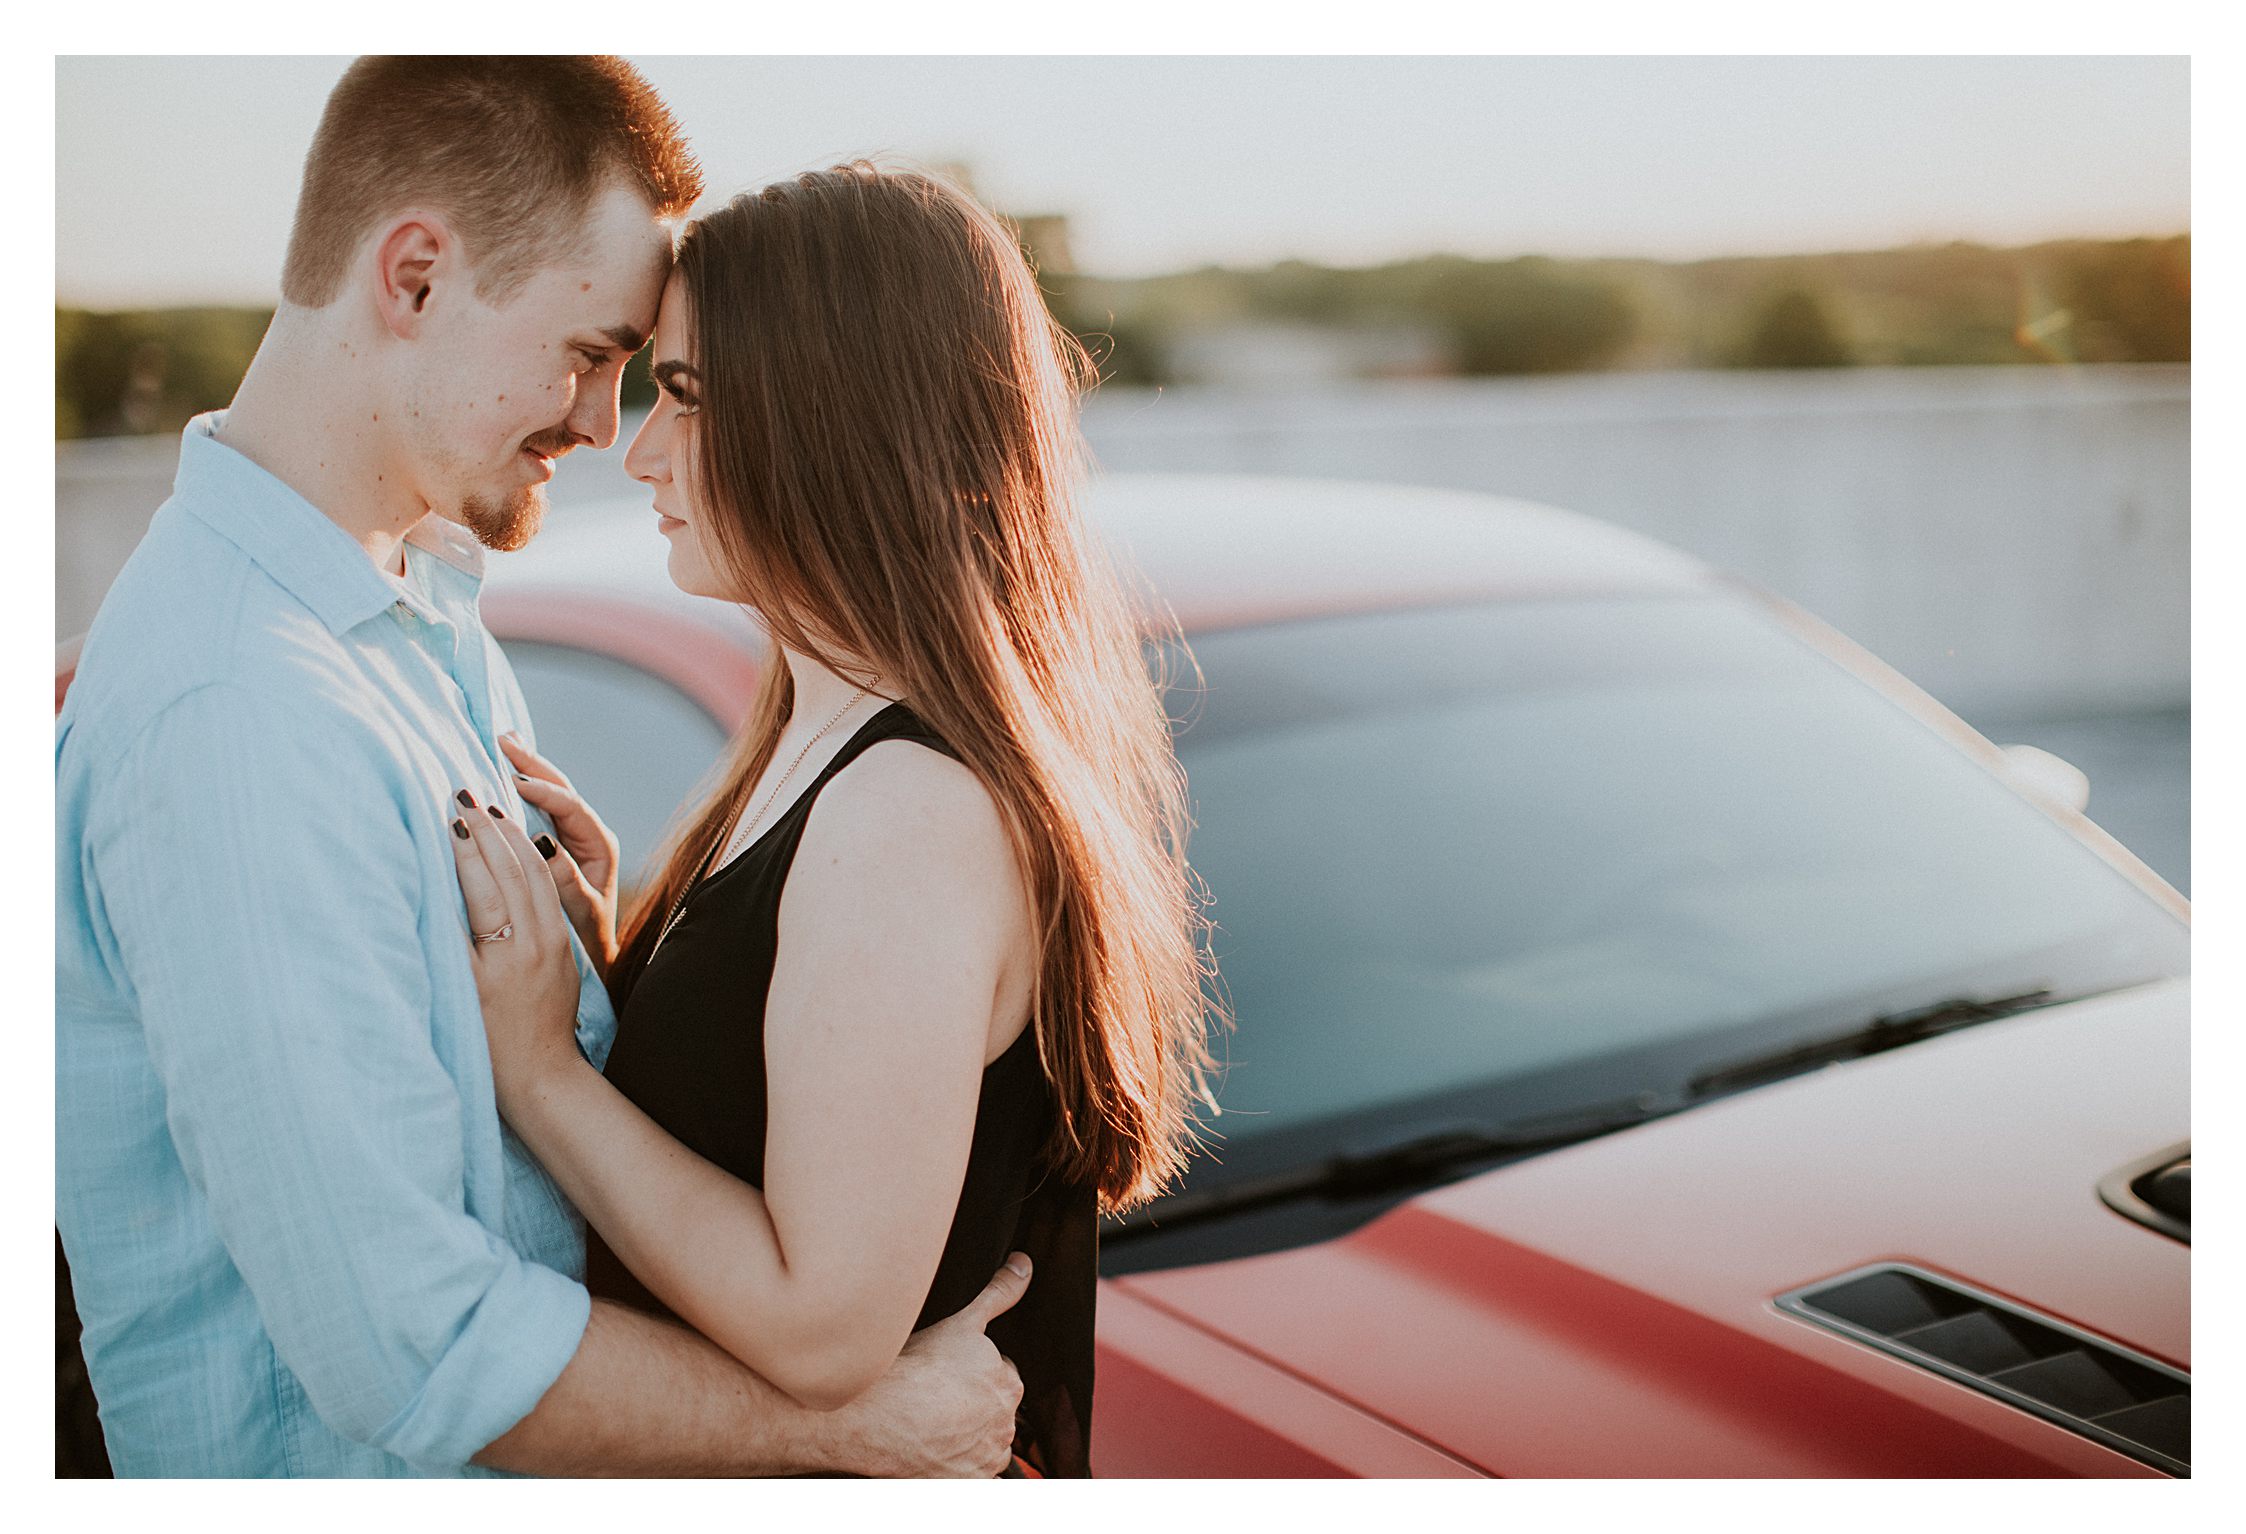 Engagement Photo by Ford Mustang GT 5.0. Ryan and Kayleena